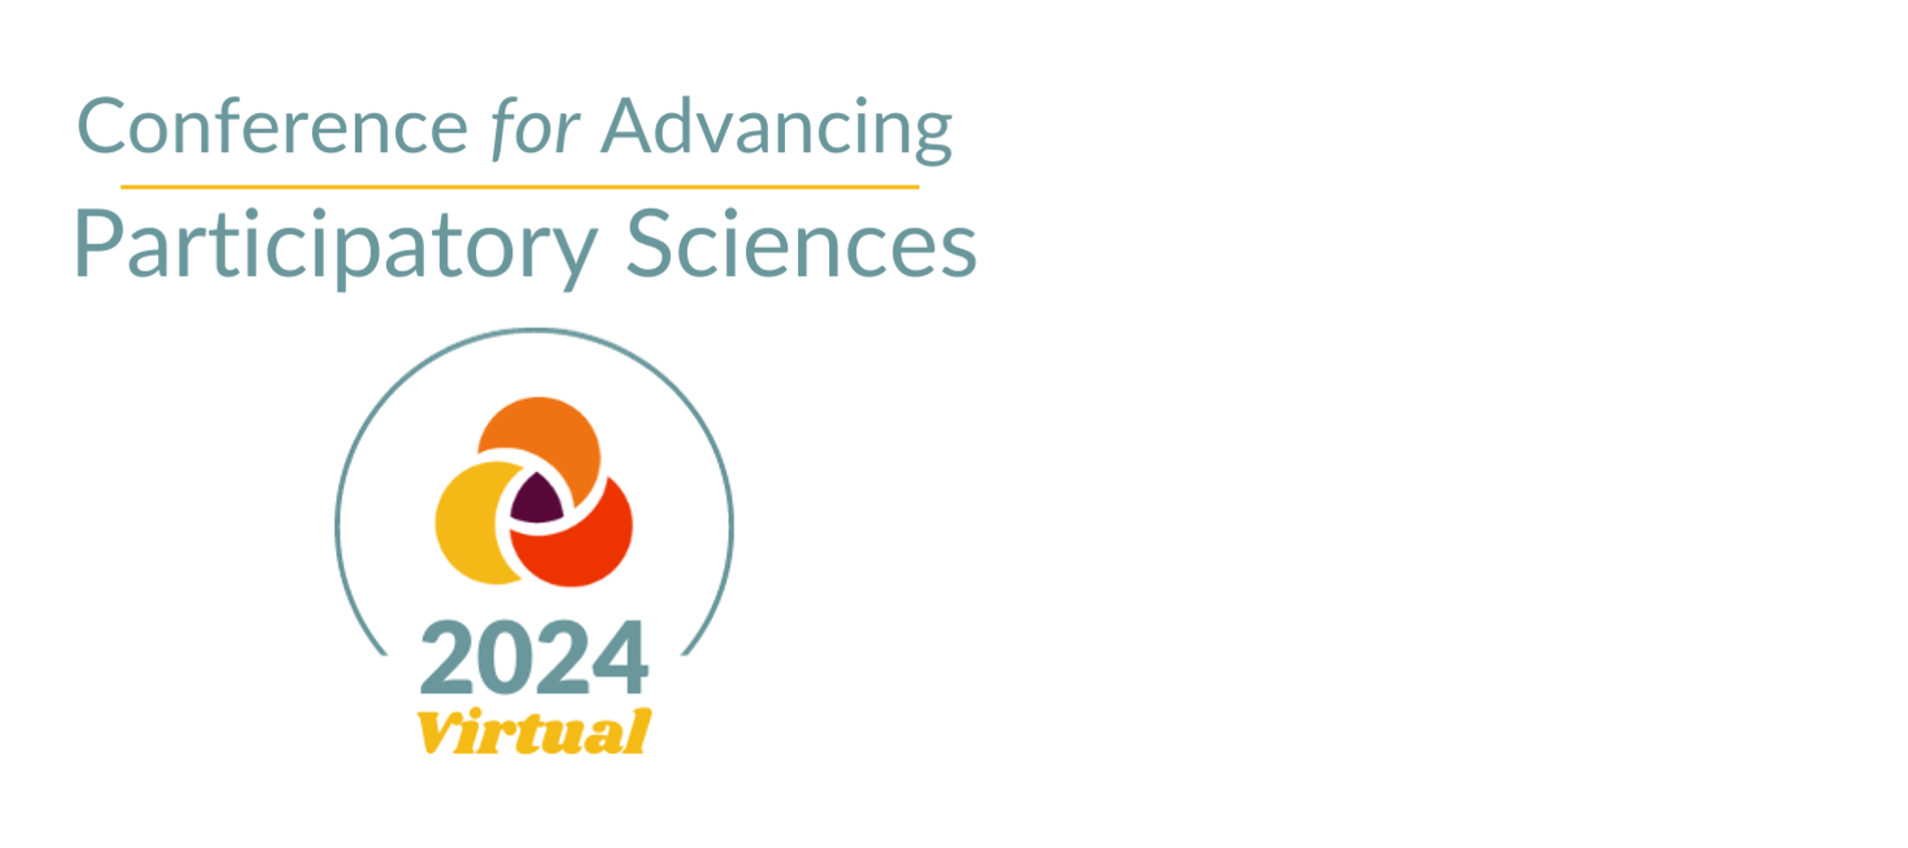 Text saying Conference for Advancing Participatory Science 2024 Virtual, and logo of three overlapping orange circles.